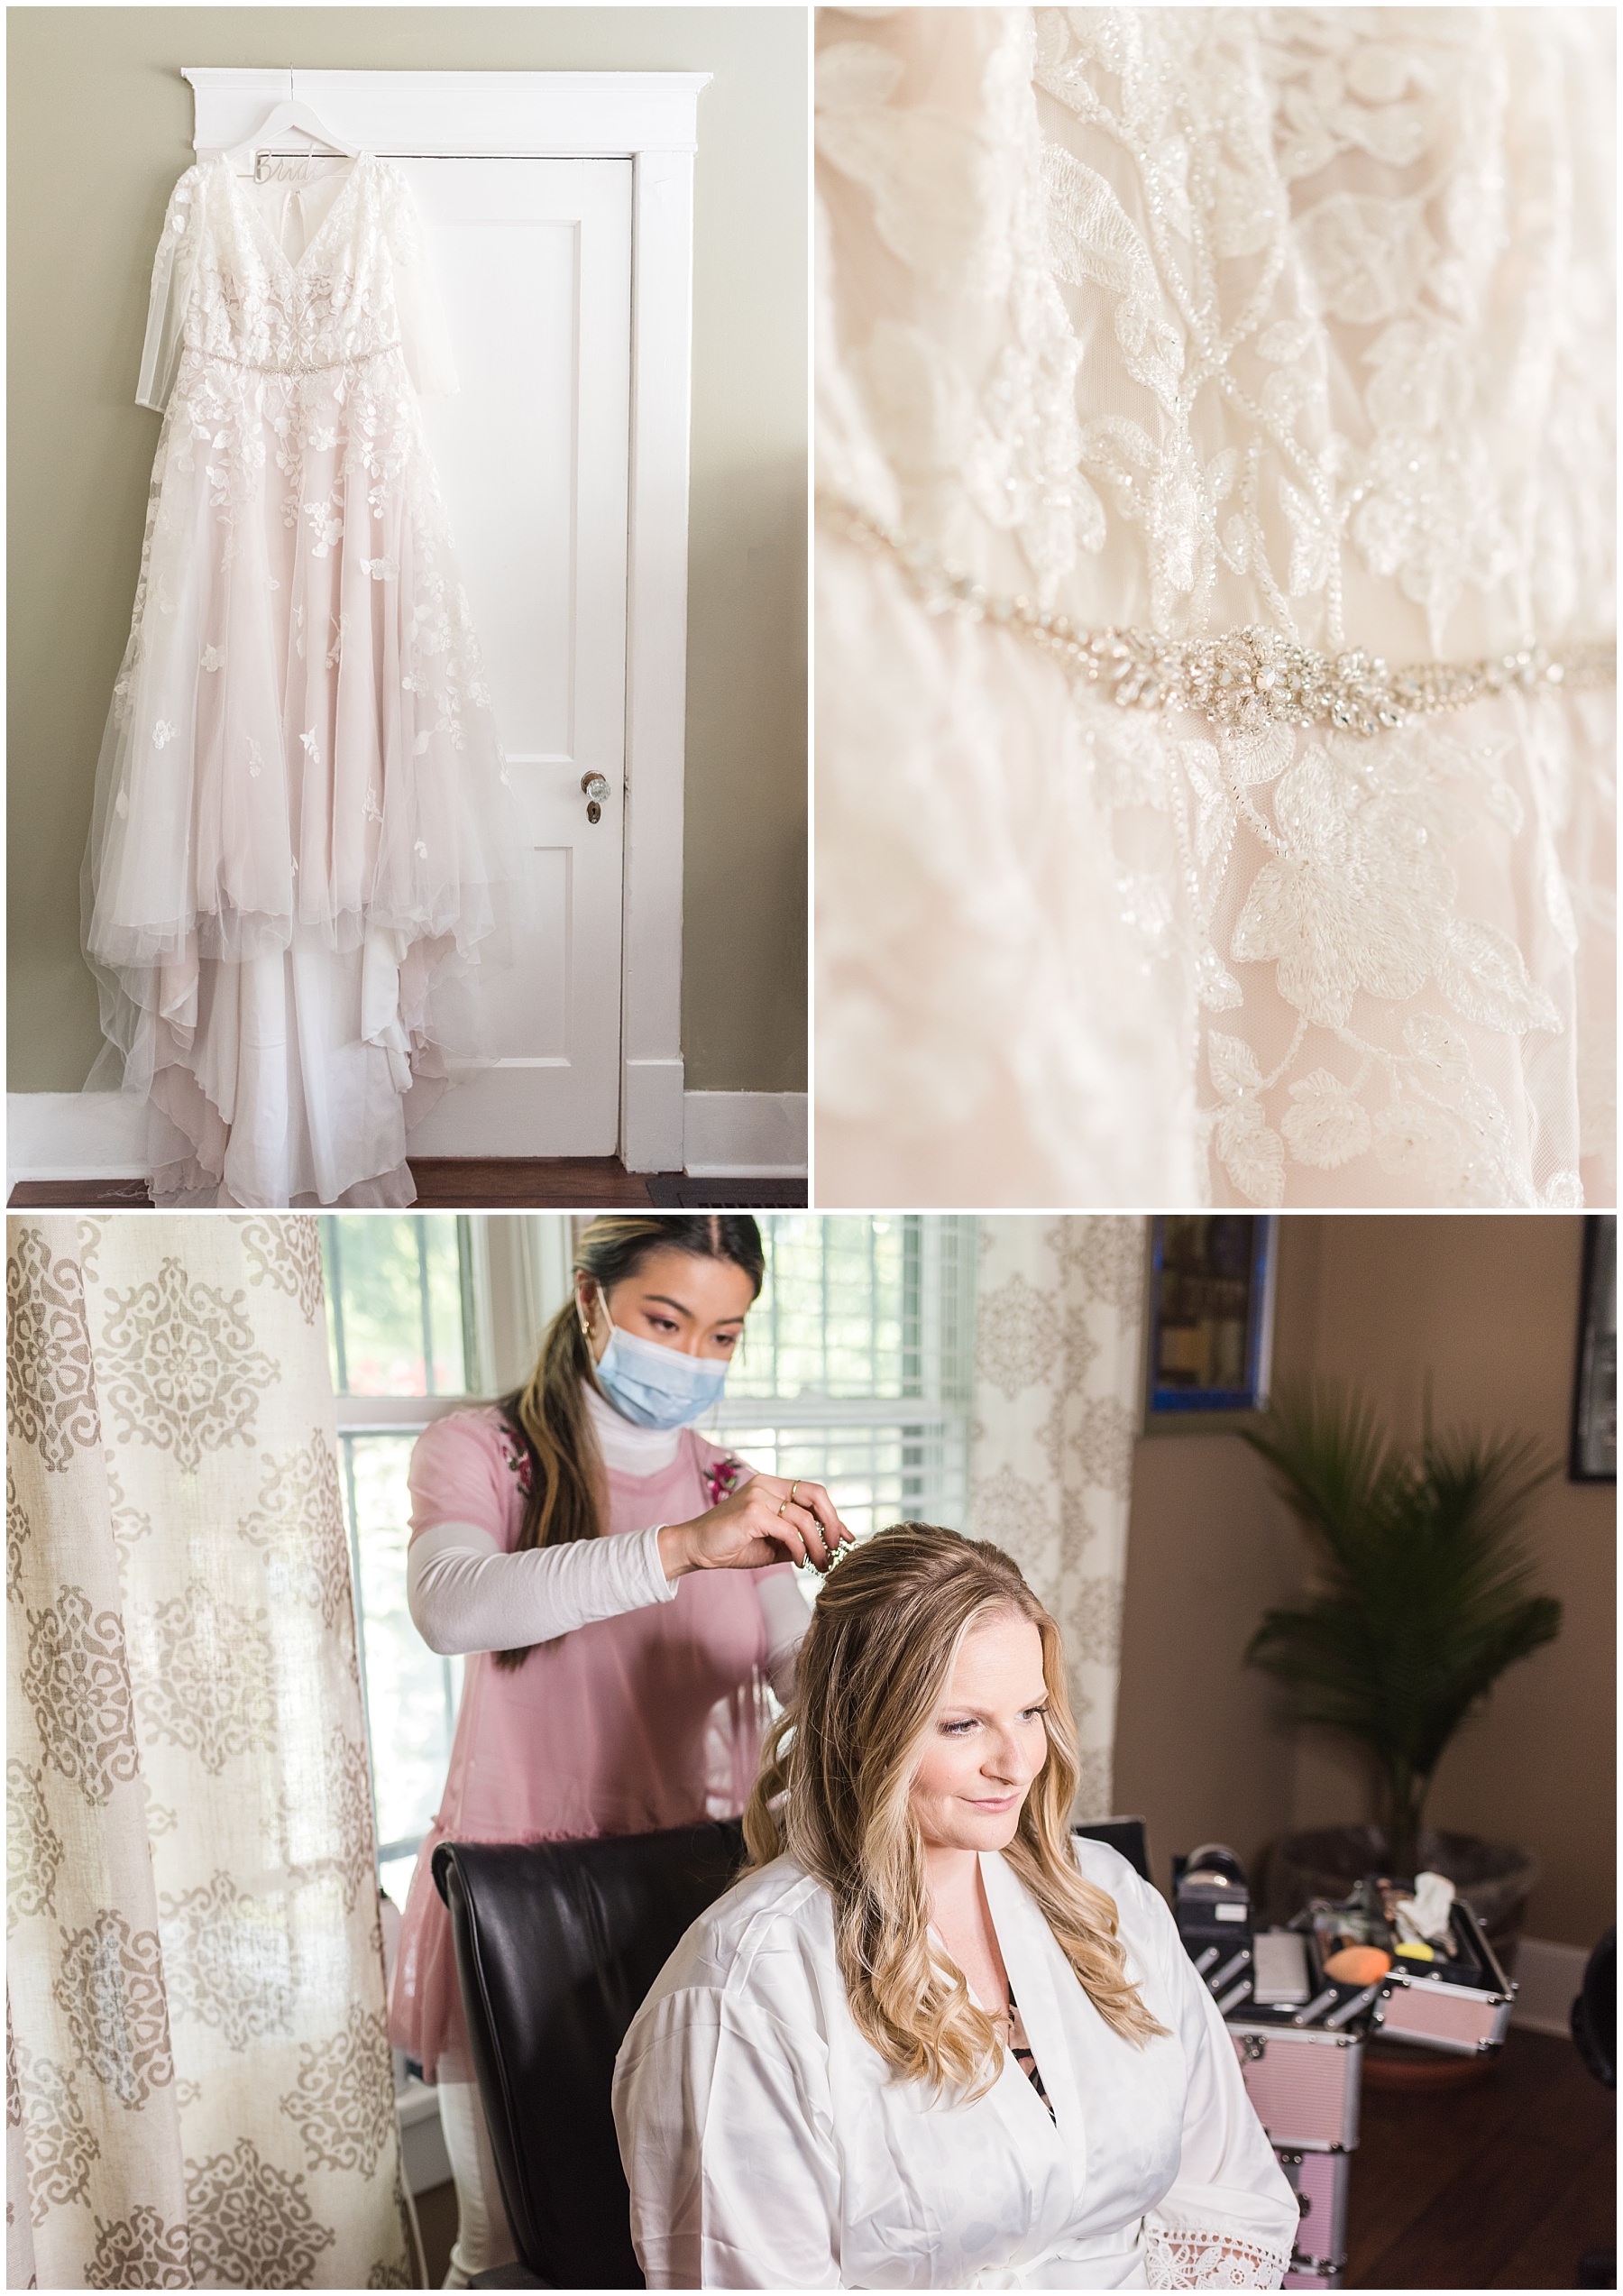 Nashville wedding photos of bride getting ready at Airbnb.